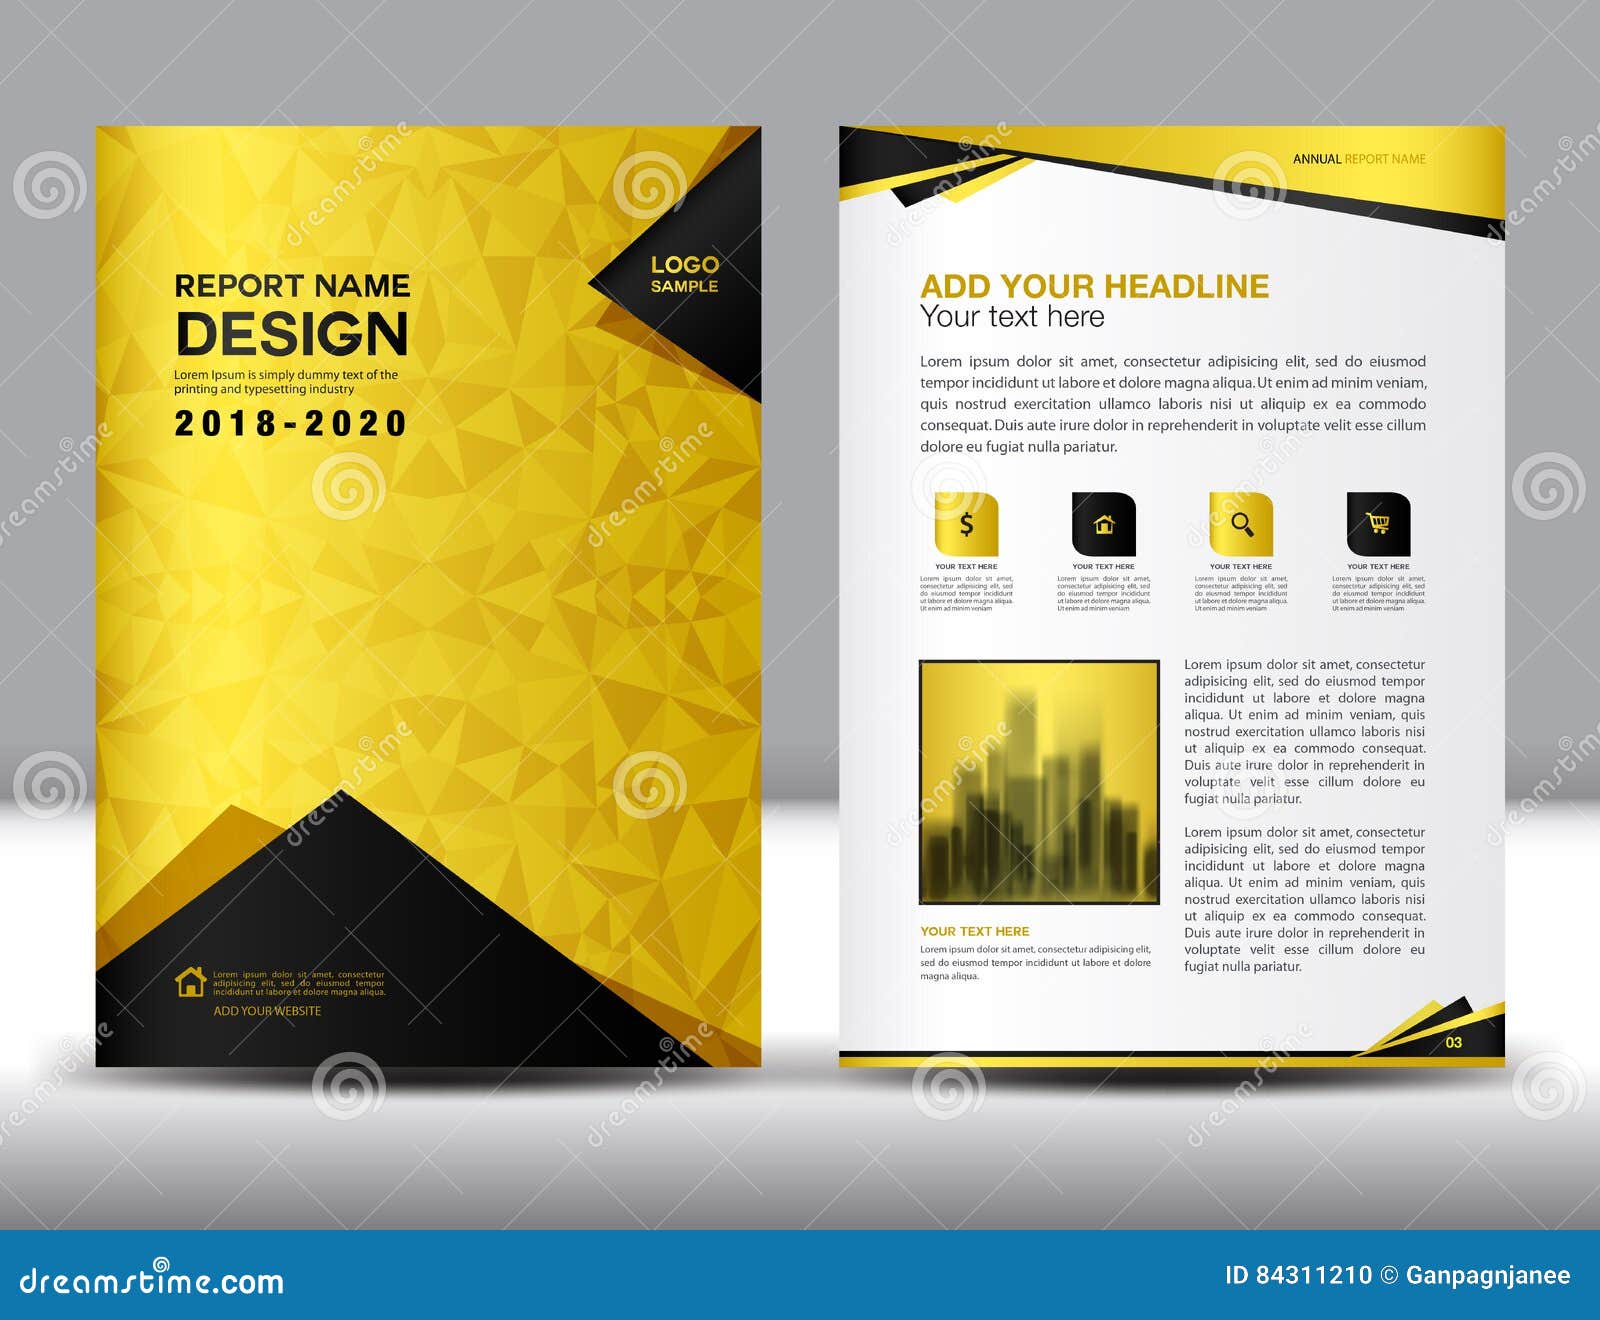 Business Brochure Flyer Template in A4 Size, Gold Cover Design Stock ...